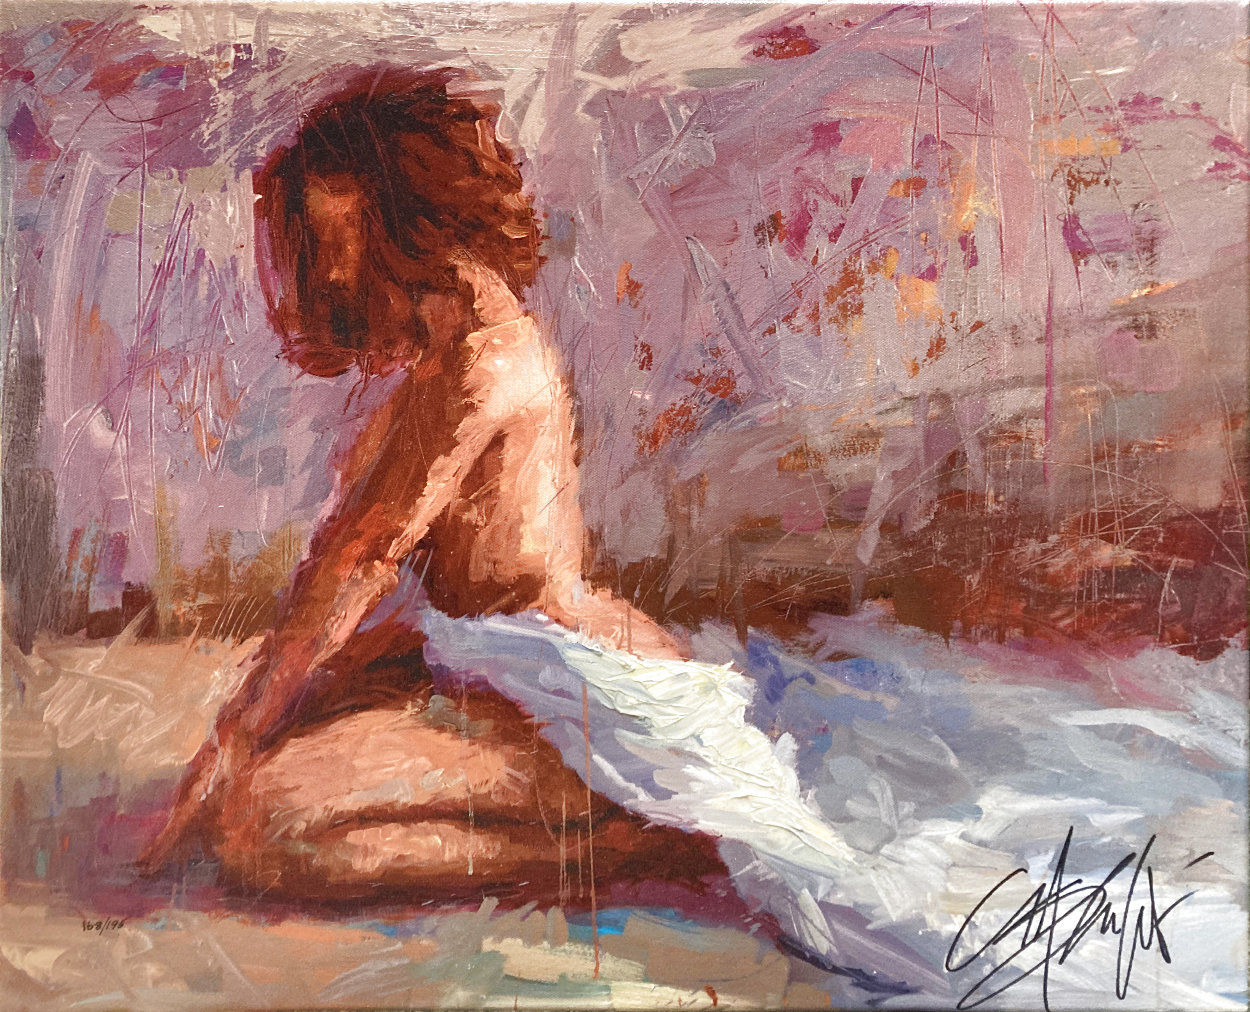 Epiphany Embellished Limited Edition Print by Henry Asencio